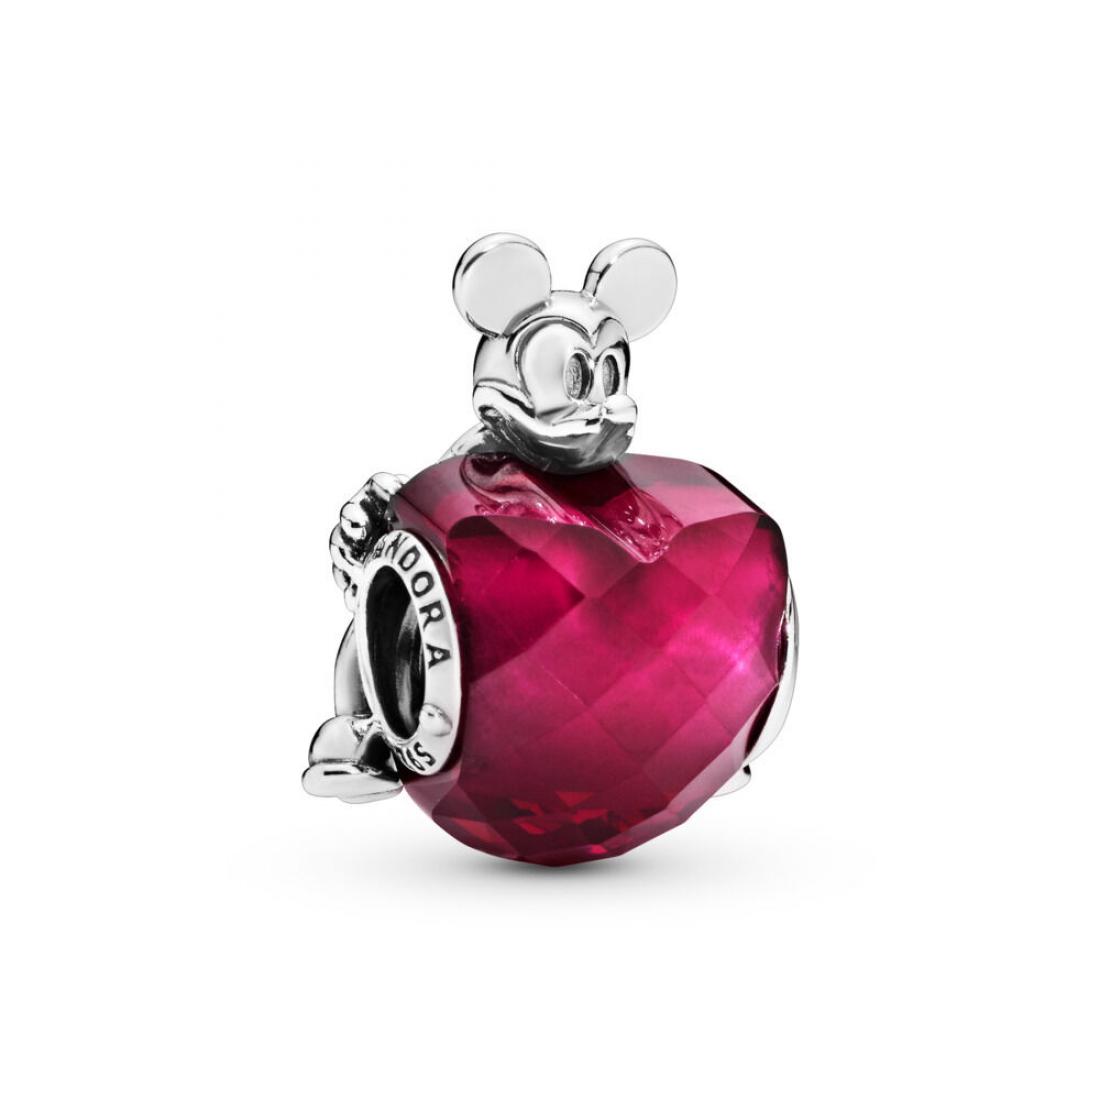 Disney, Mickey Love Heart Charm, Fuchsia Rose Crystal Sterling silver, Red, Crystal